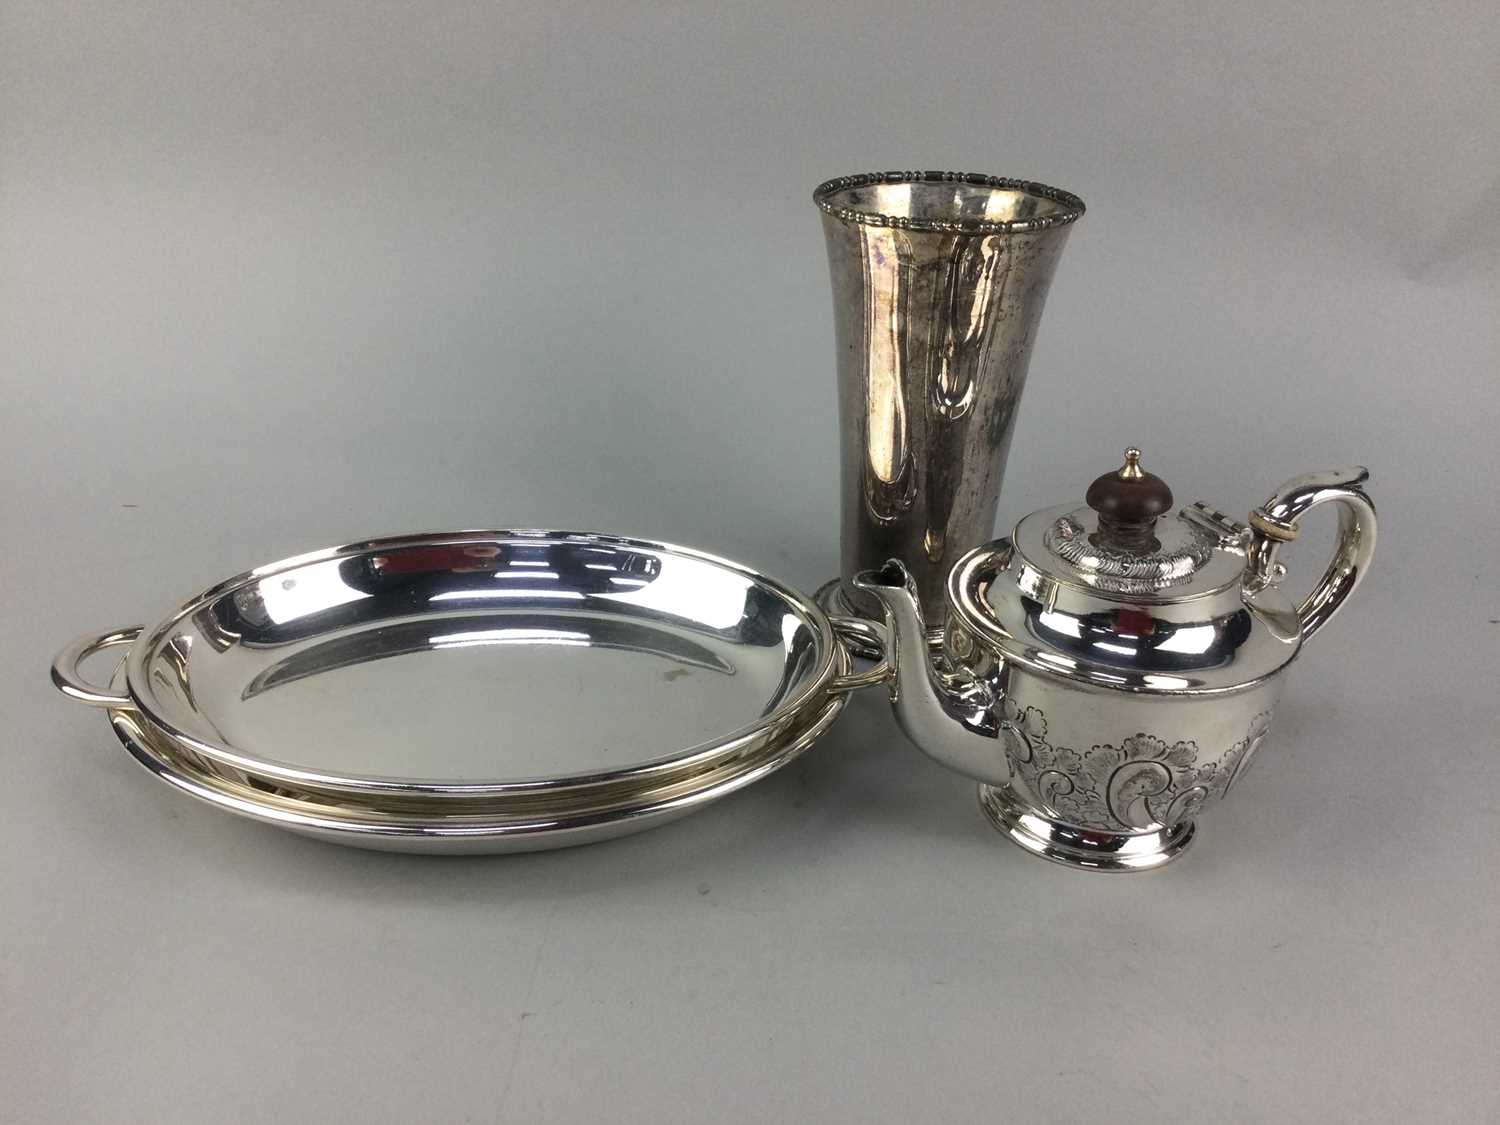 Lot 19 - A SILVER PLATED CIRCULAR TRAY AND OTHER PLATE